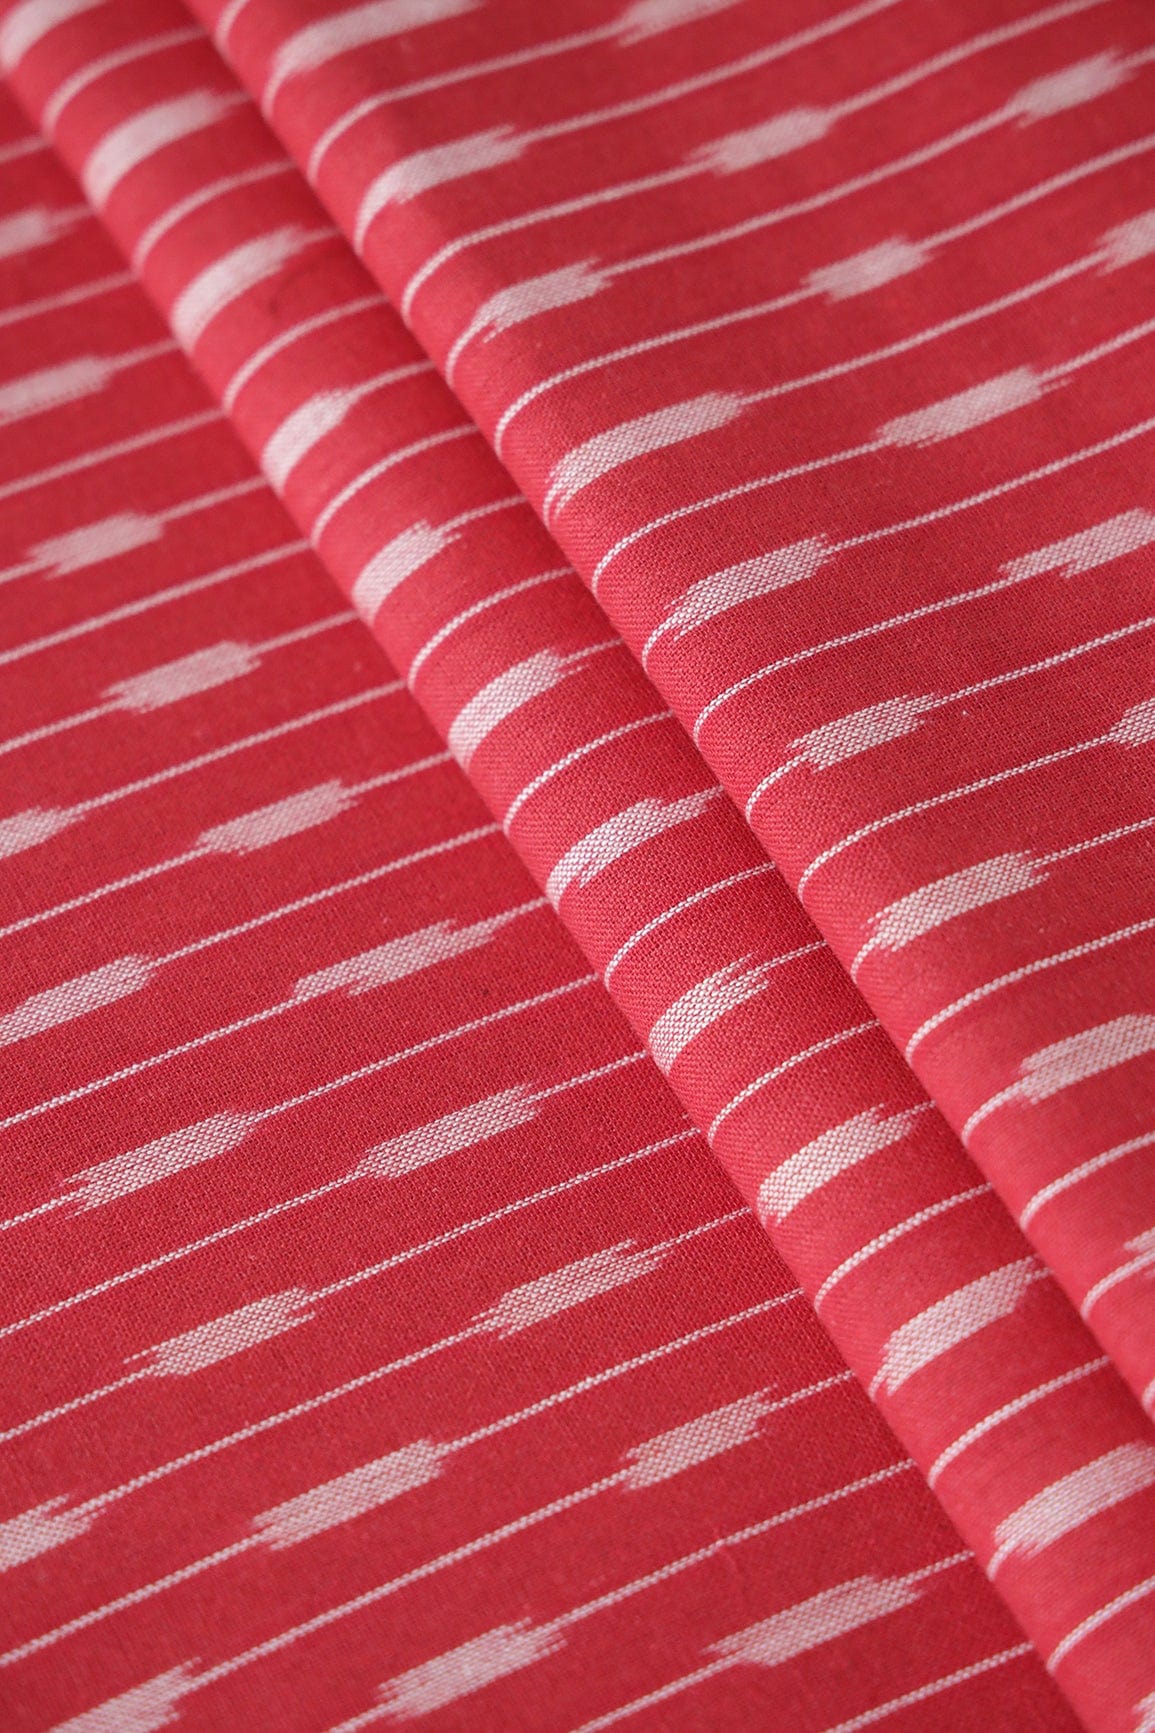 doeraa Hand Woven Red And White Stripes Pattern Handwoven Ikat Organic Cotton Fabric